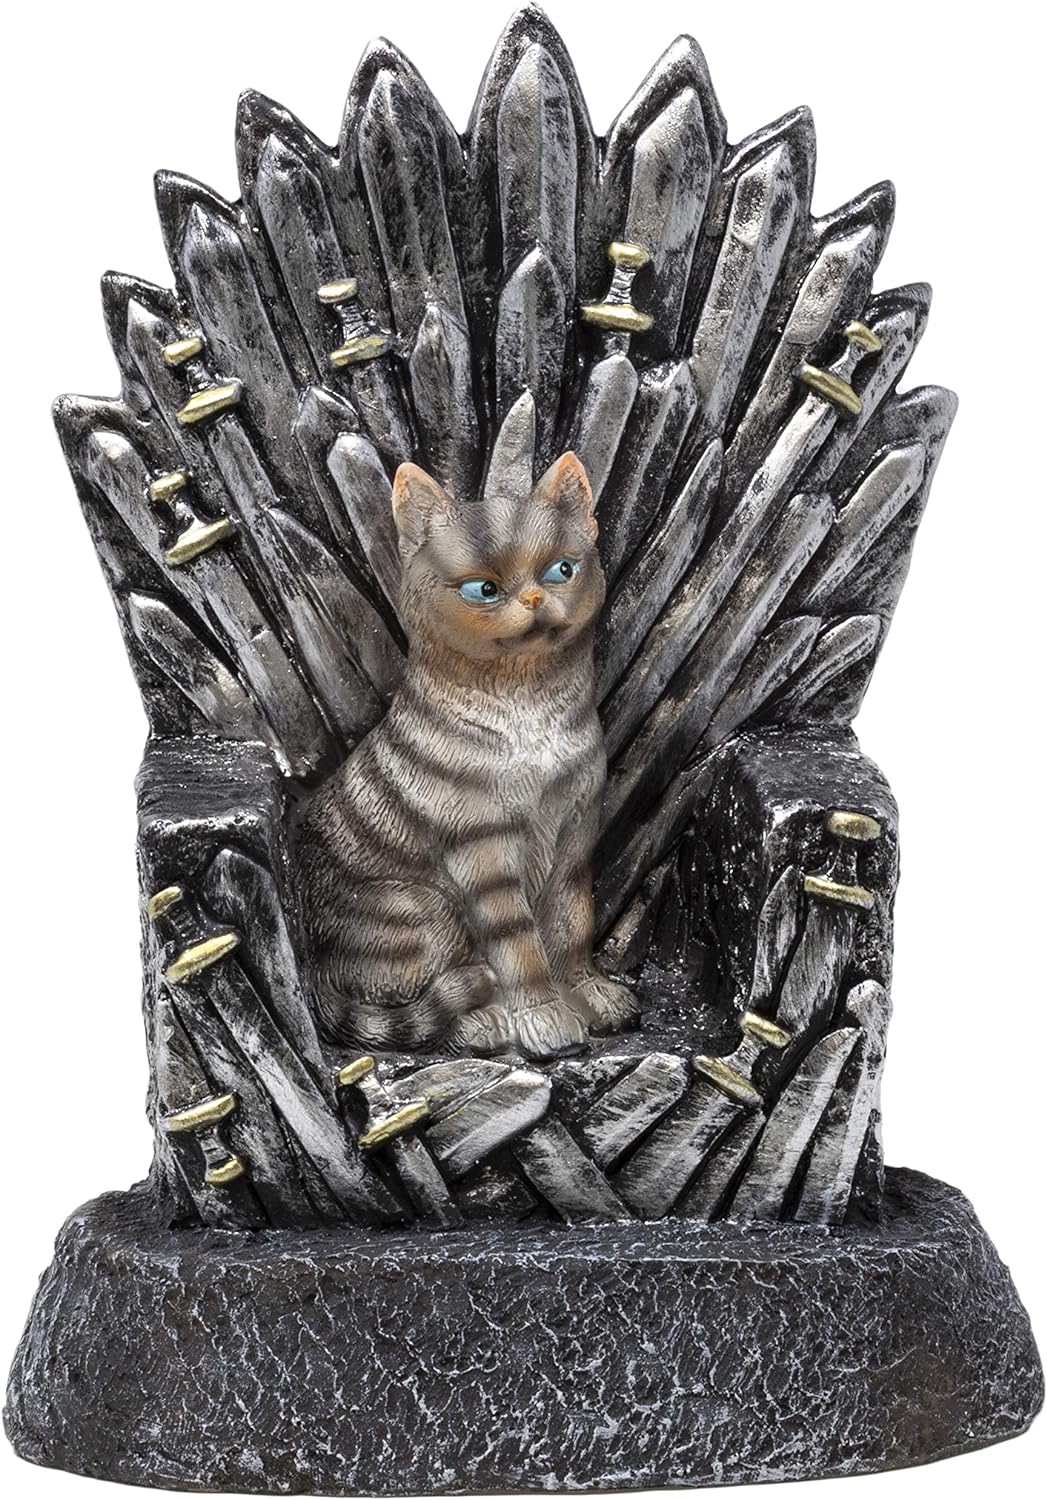 Cat On A Throne Garden Gnome Statue- Indoor/Outdoor Garden Gnome Sculpture for Patio, Yard or Lawn